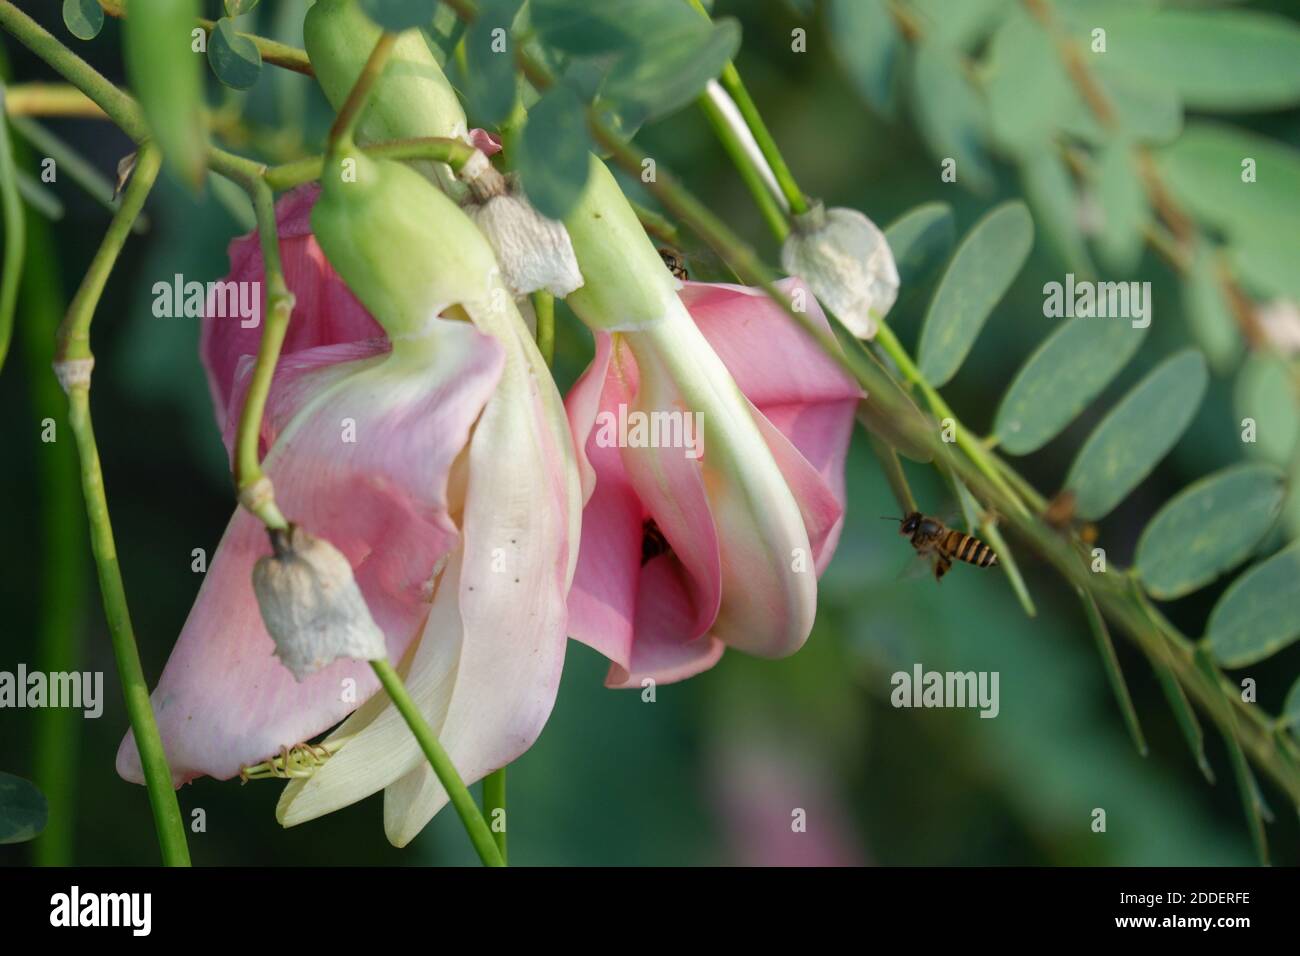 defocuse close up image of Pink Turi (Sesbania grandiflora) flower is eaten as a vegetable and medicine. The leaves are regular and rounded. The fruit Stock Photo